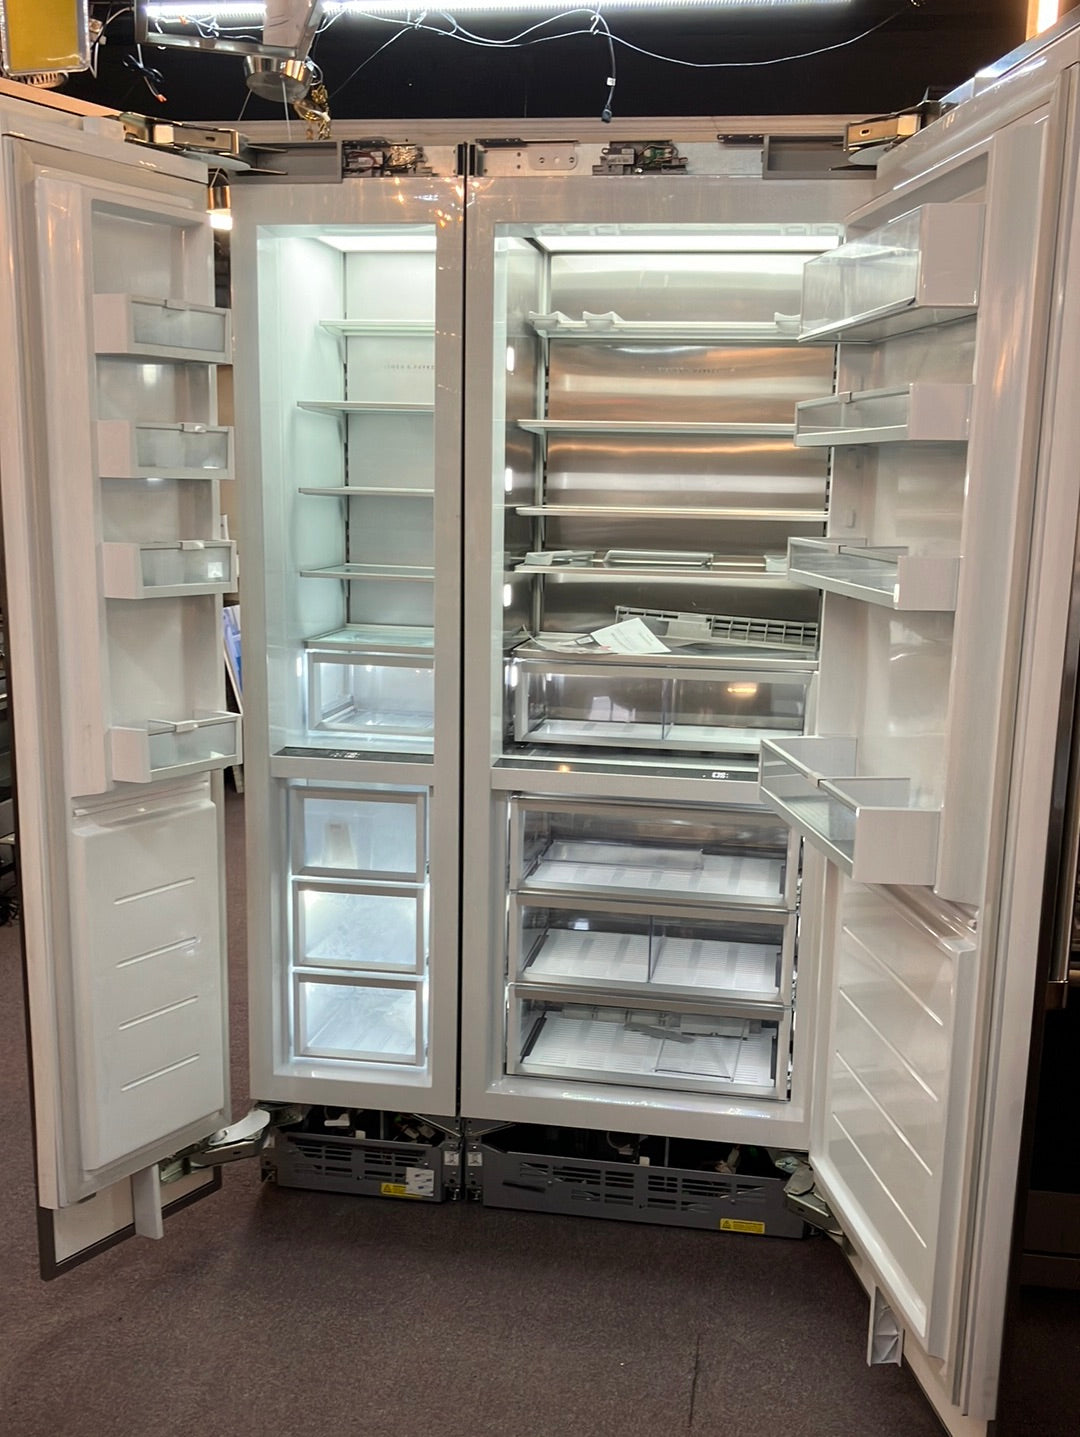 Fisher & Paykel Series 9 RS1884FLJ1 18 Inch Panel Ready Freezer and RS3084FRJ1 30" Panel Ready Refrigerator 48"